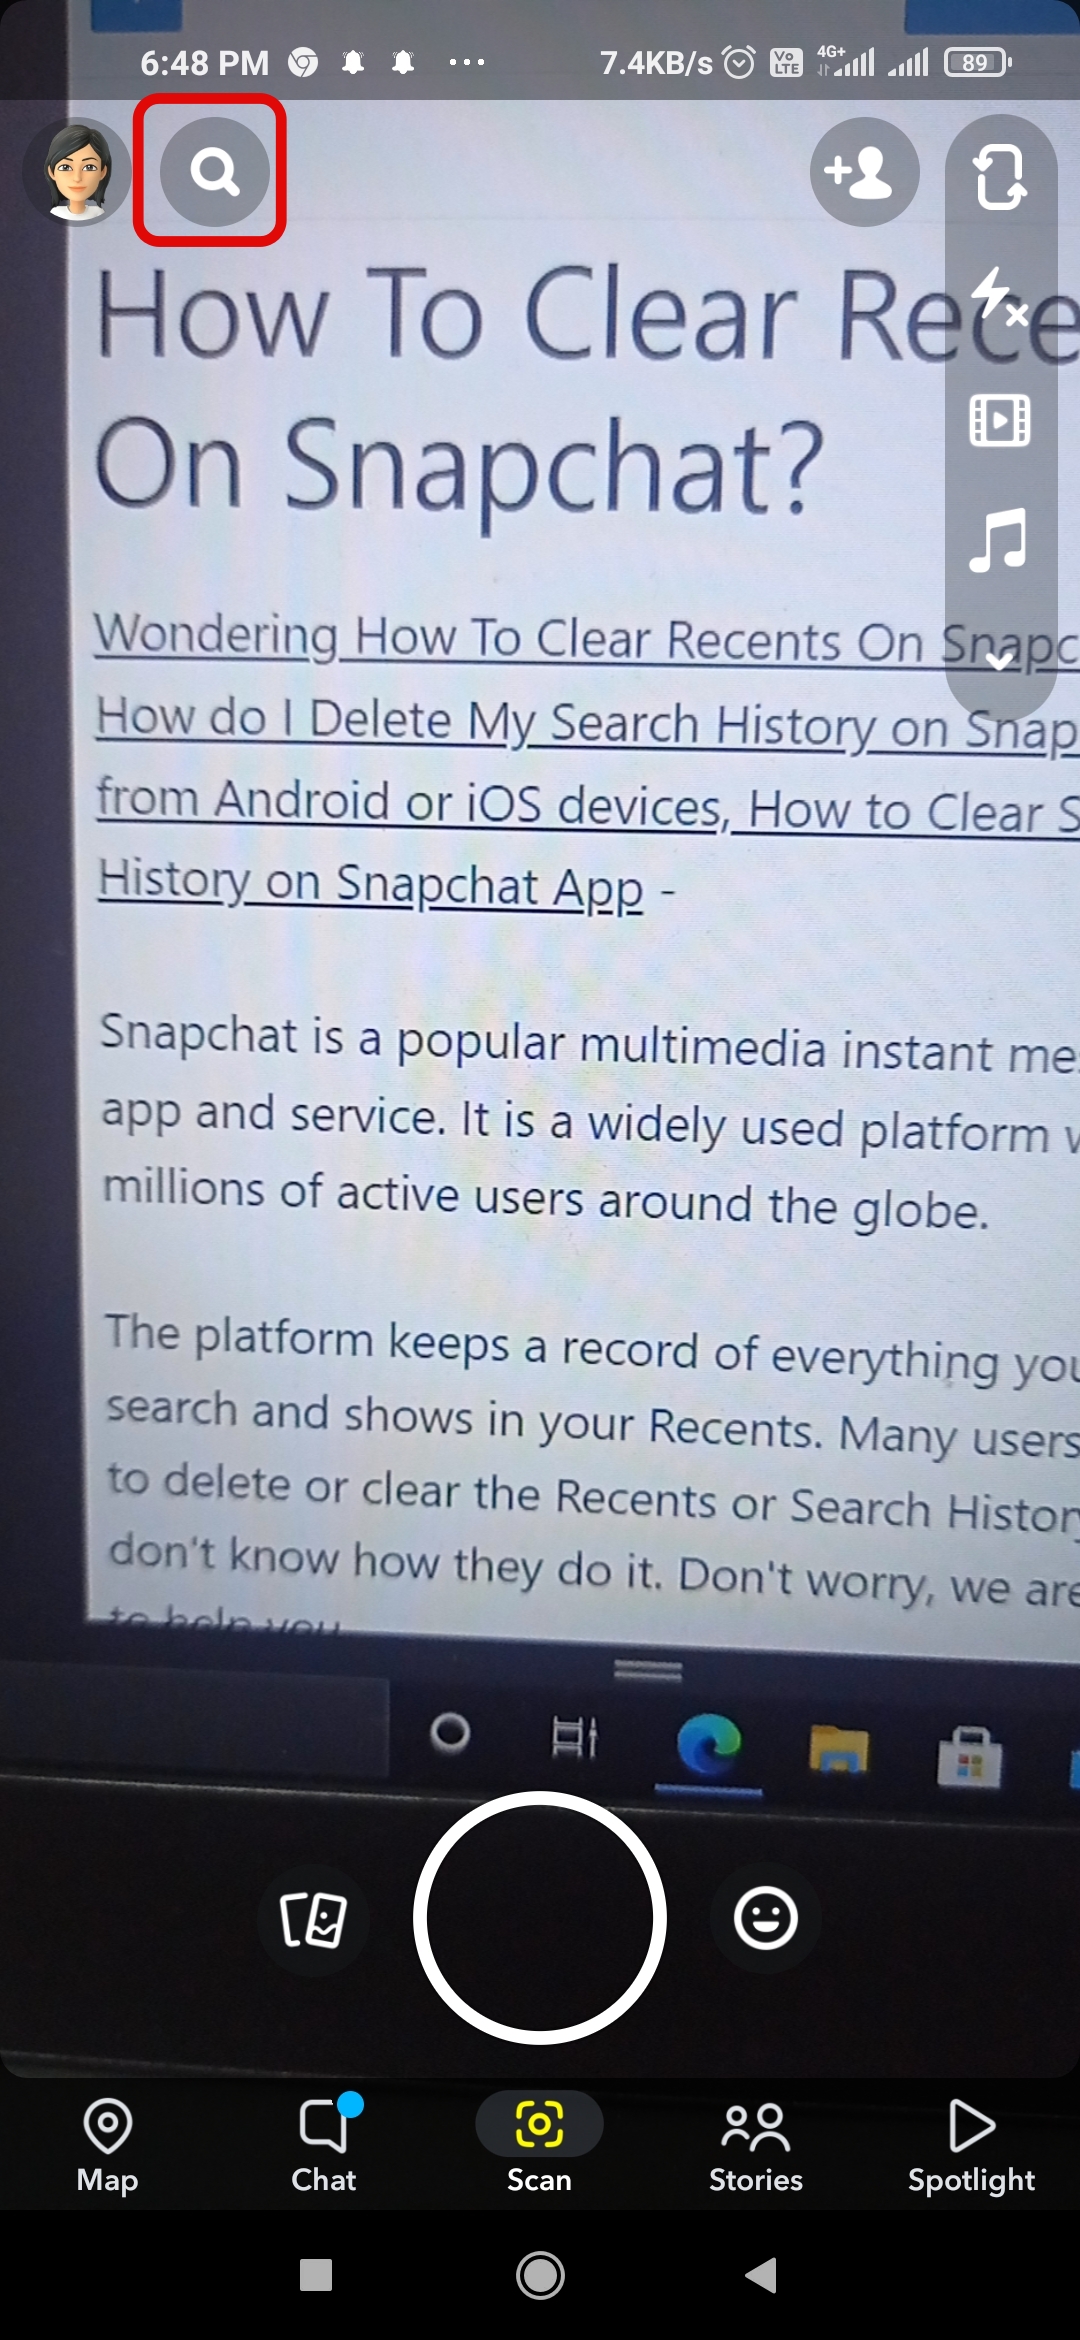 How To Delete Search History On Snapchat?